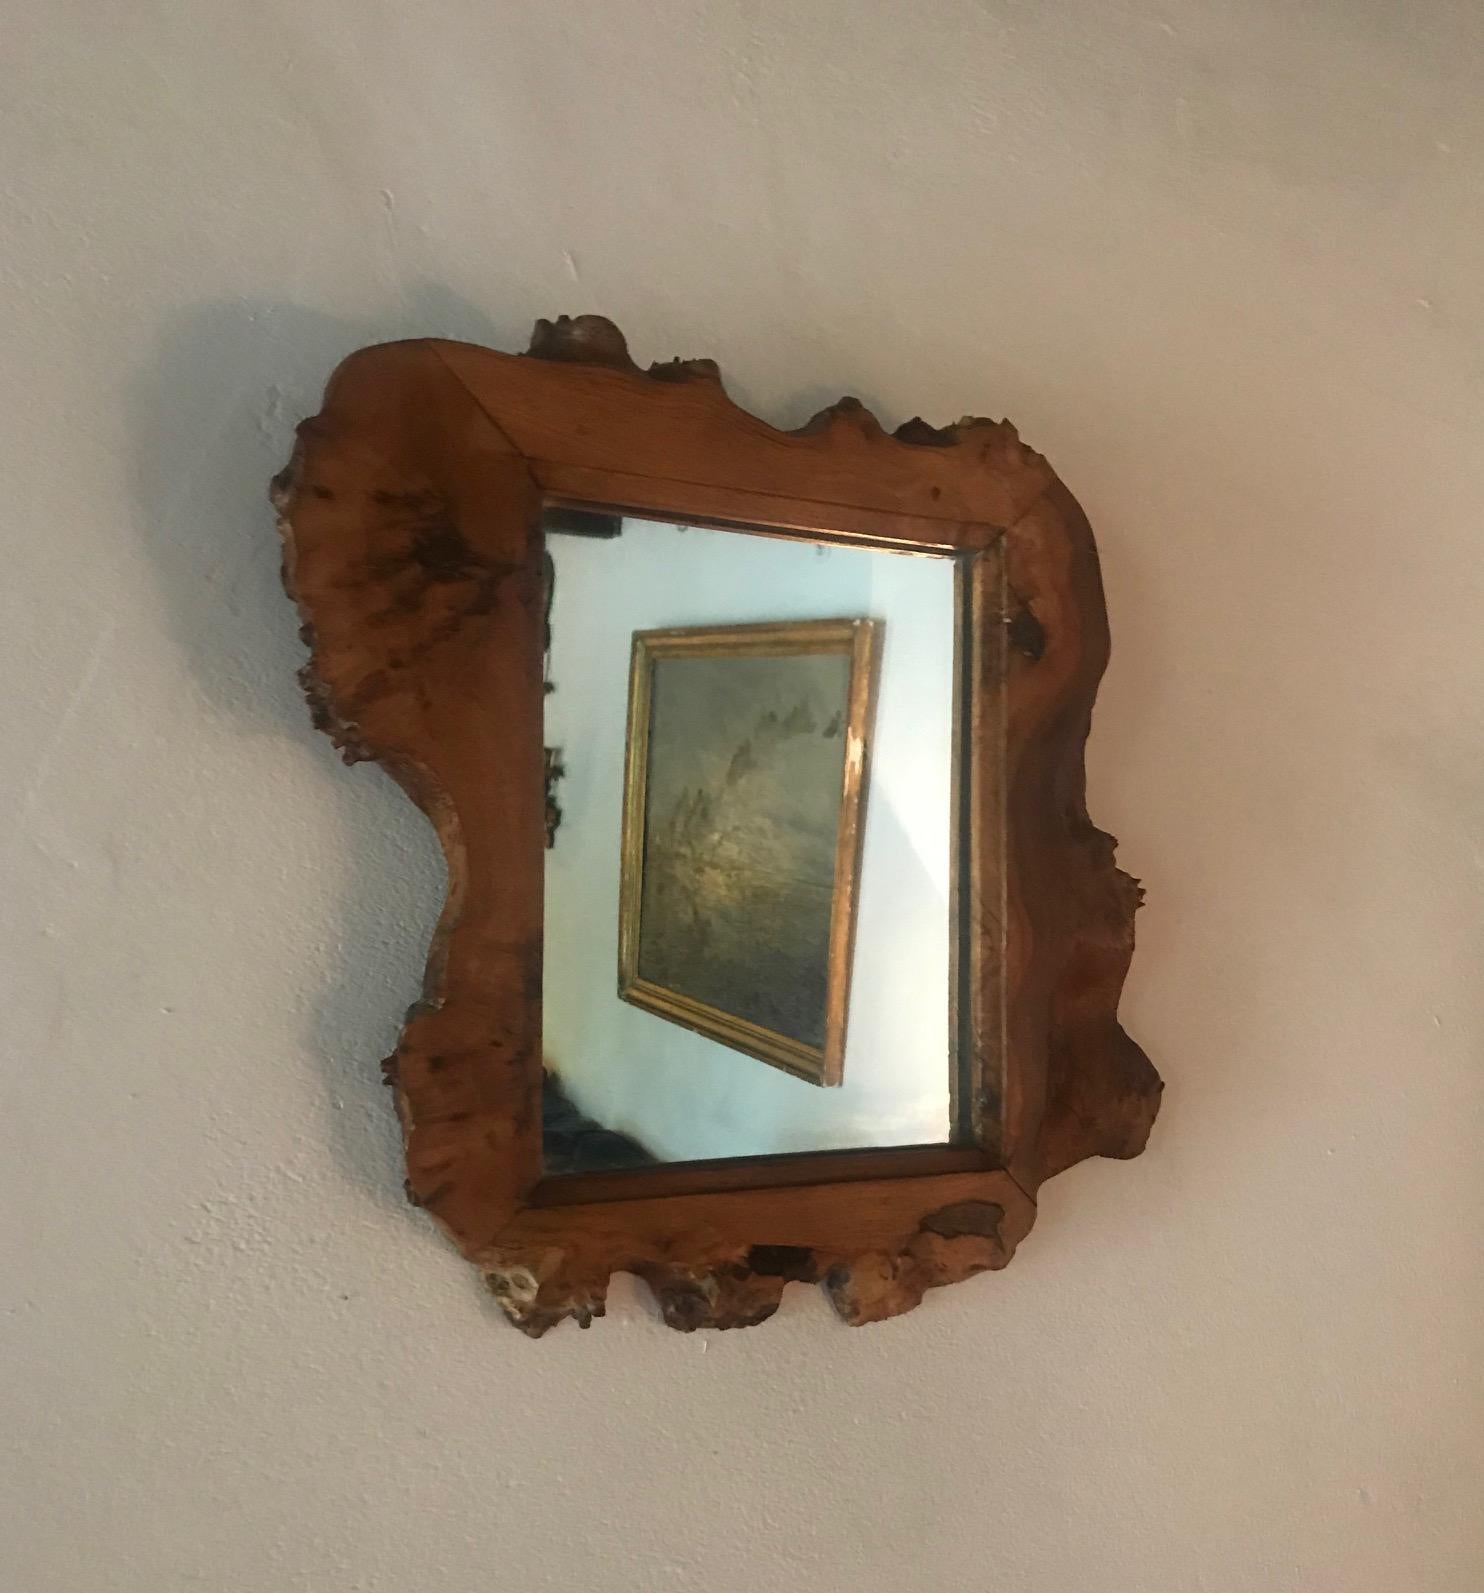 A French 1970s knarly olive wood mirror. Interesting, naturalistic shape.